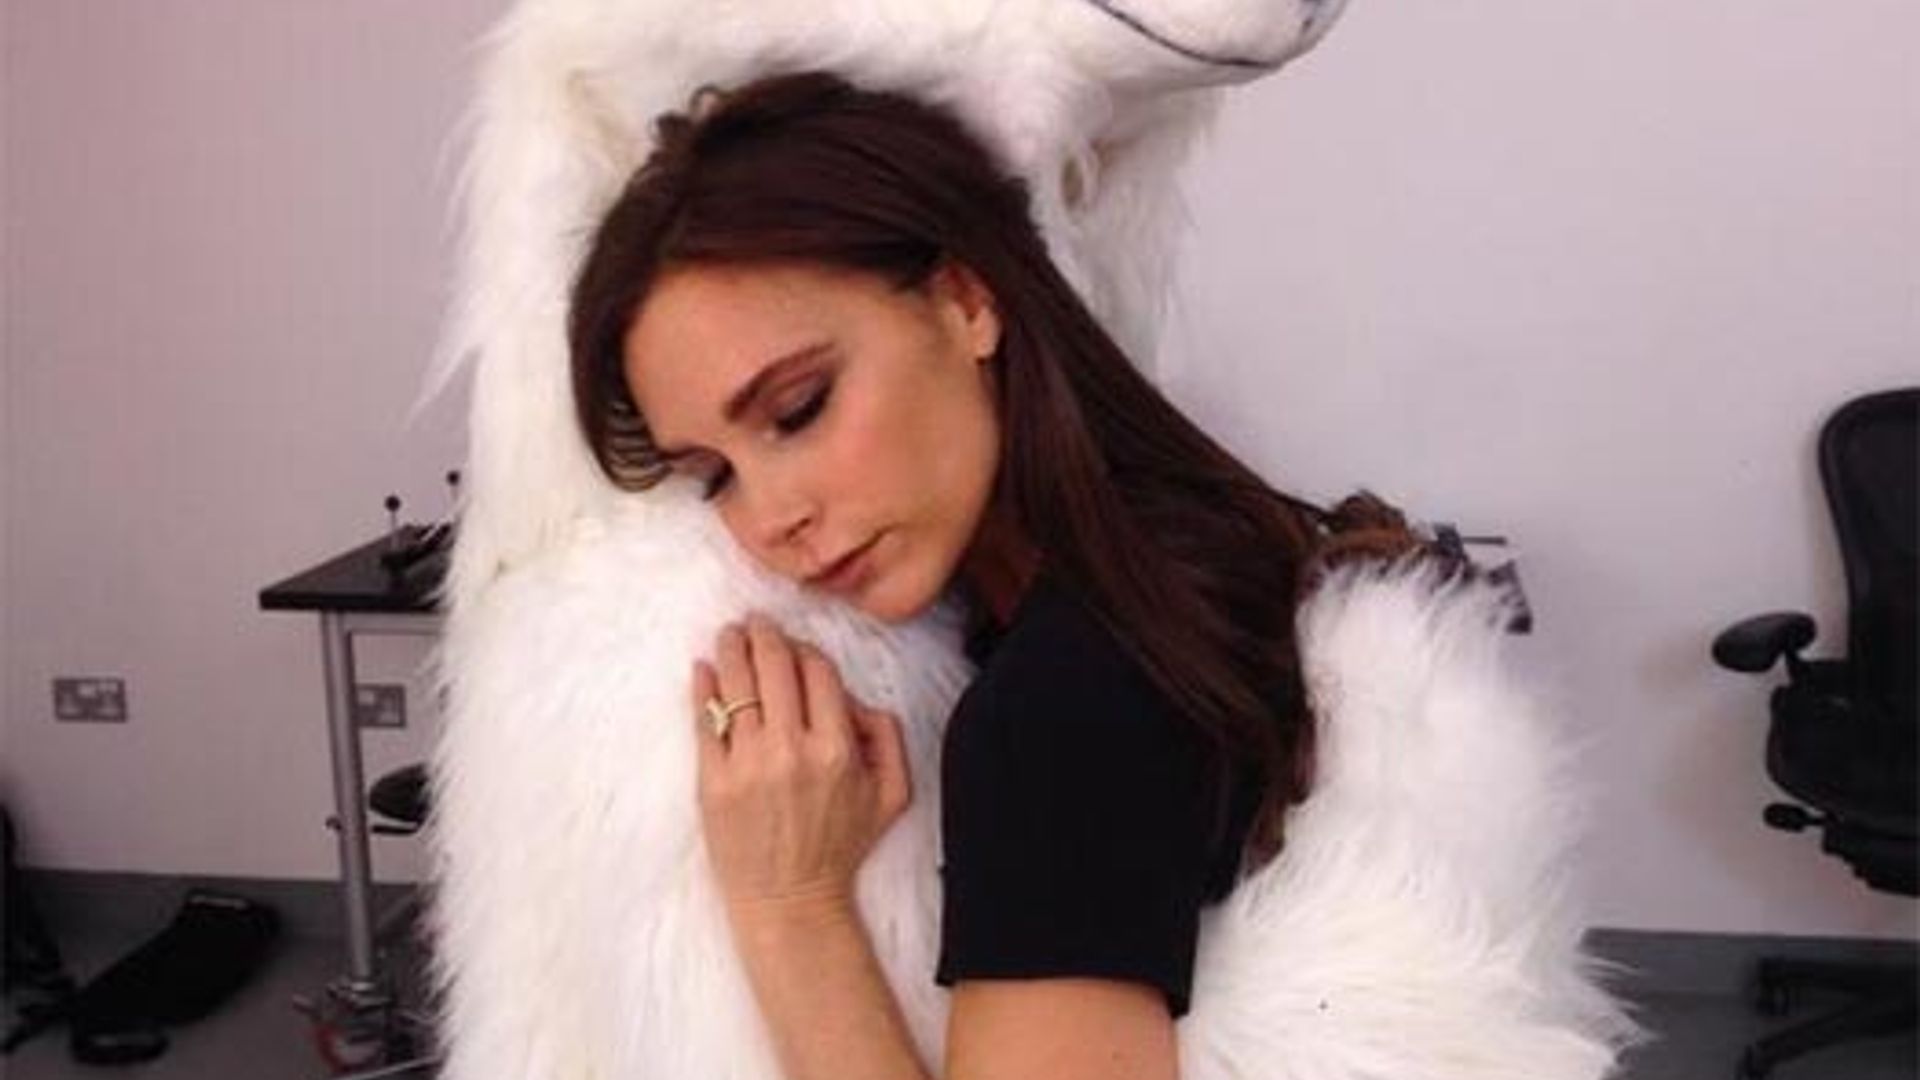 'It's that time of year again': Victoria Beckham gets ready for the festive season